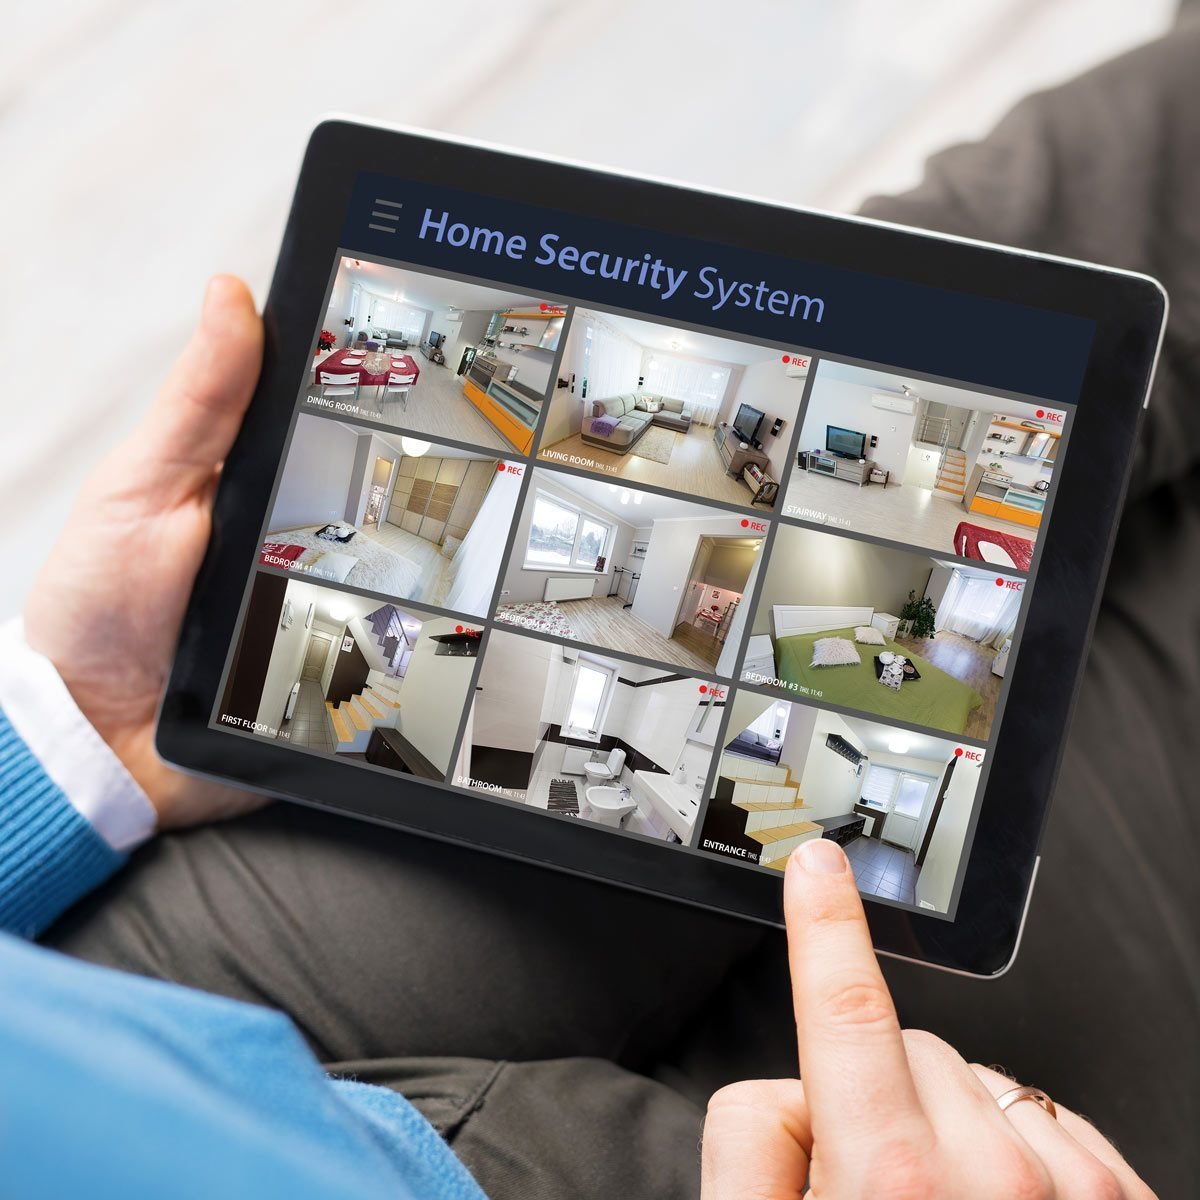 Getting Started with Home Security Cameras